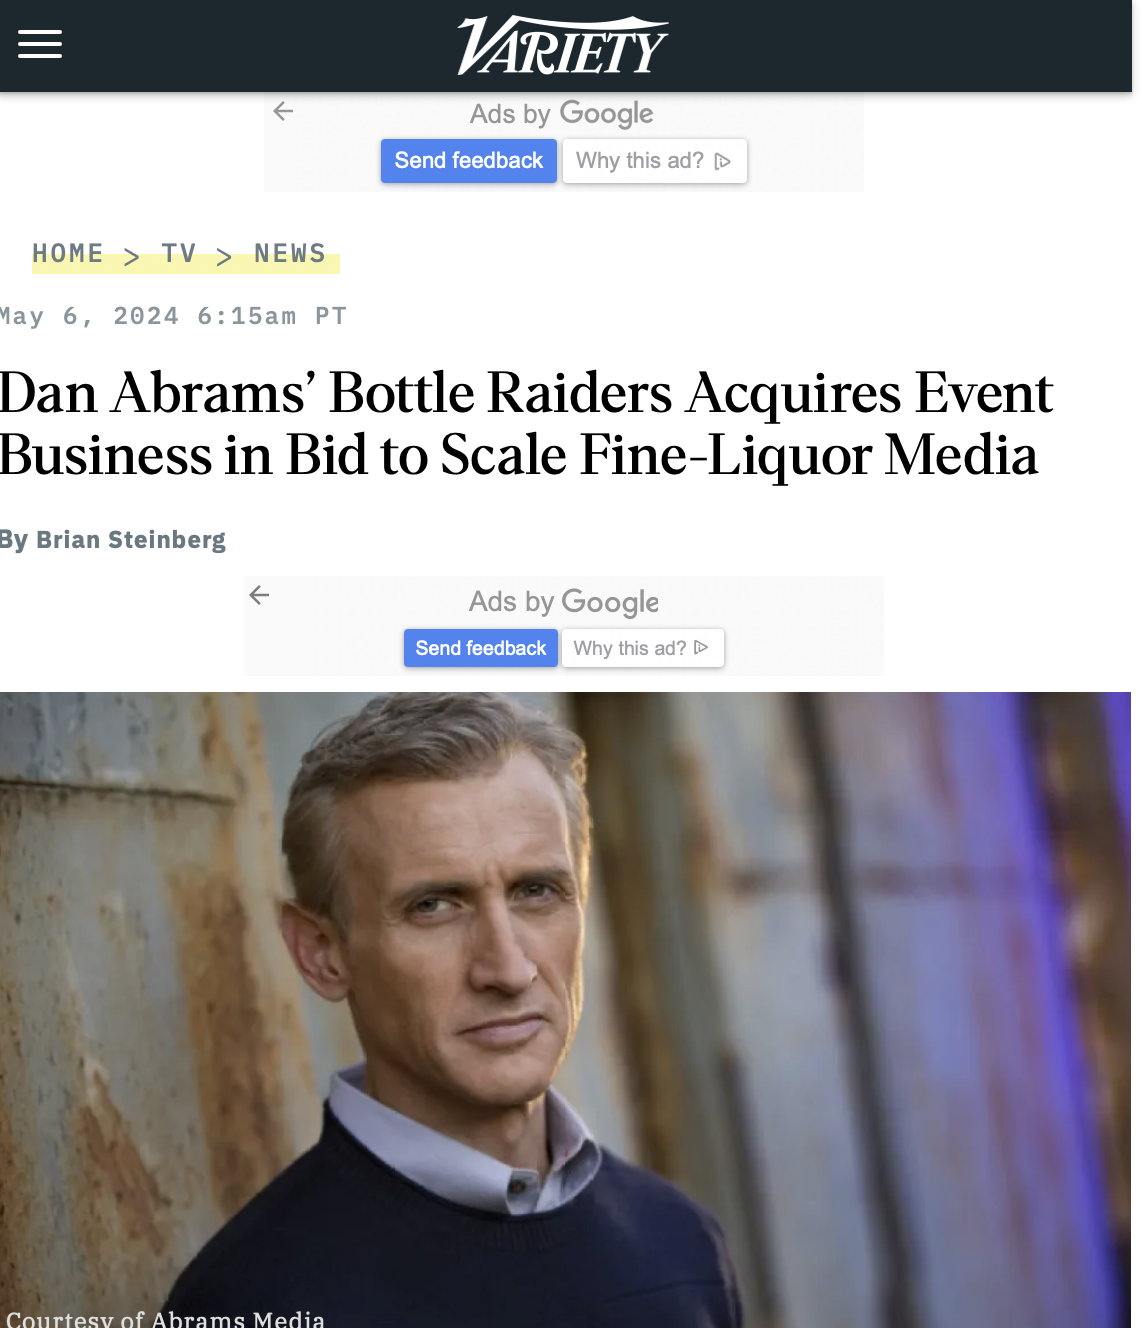 Variety publishes details of Dan Abrams' new acquisitions for Bottle Raiders.